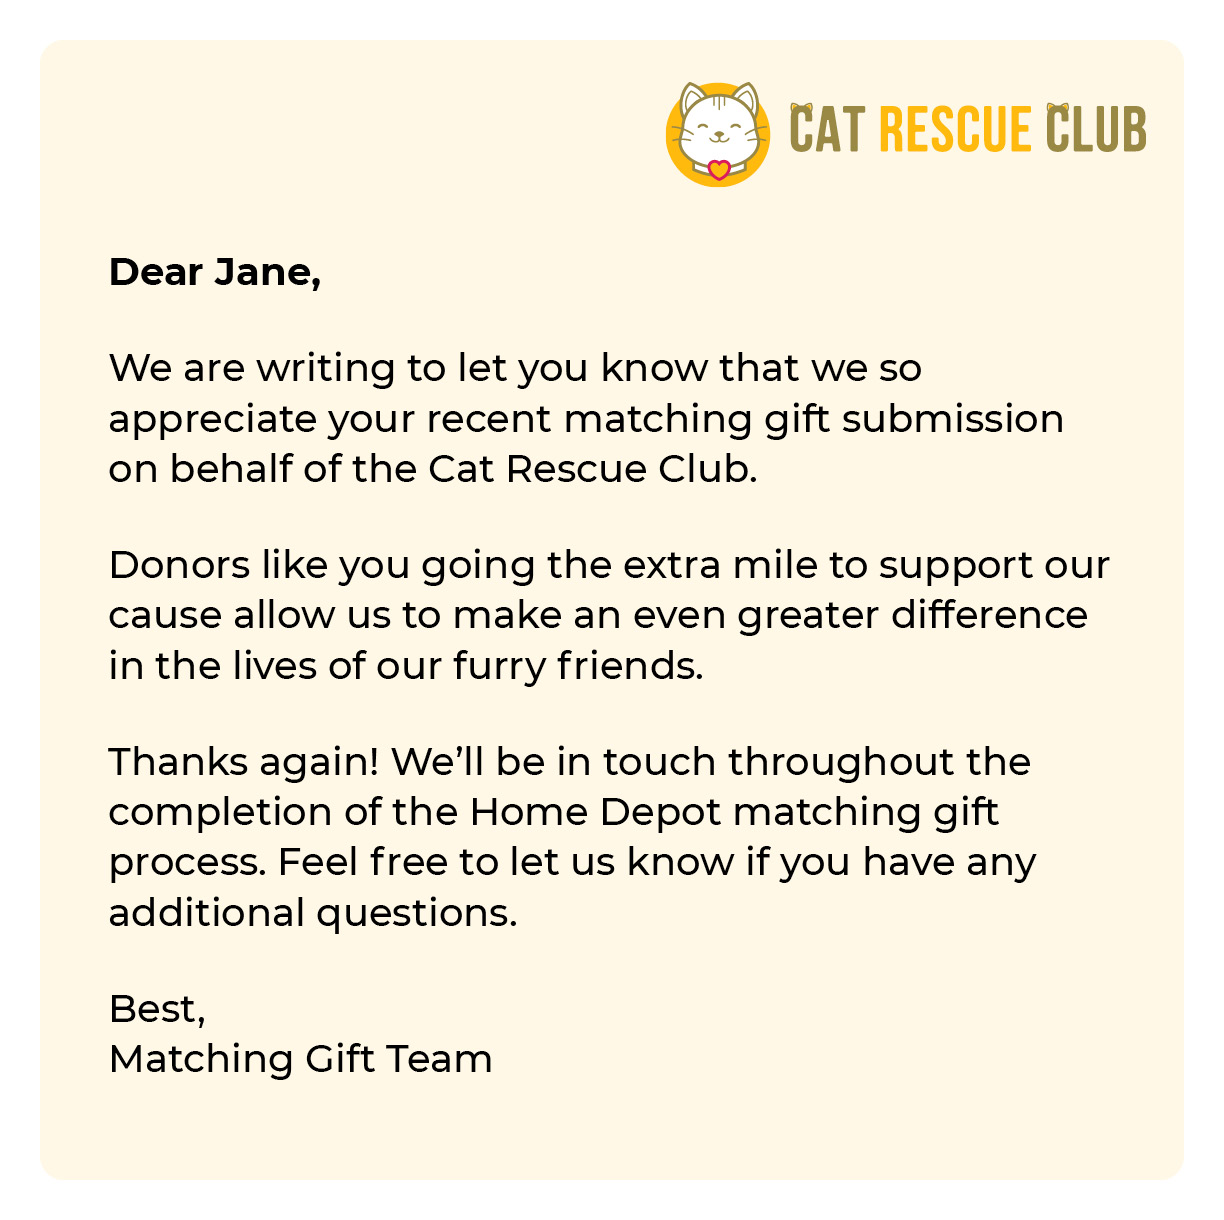 Request submission matching gift letter